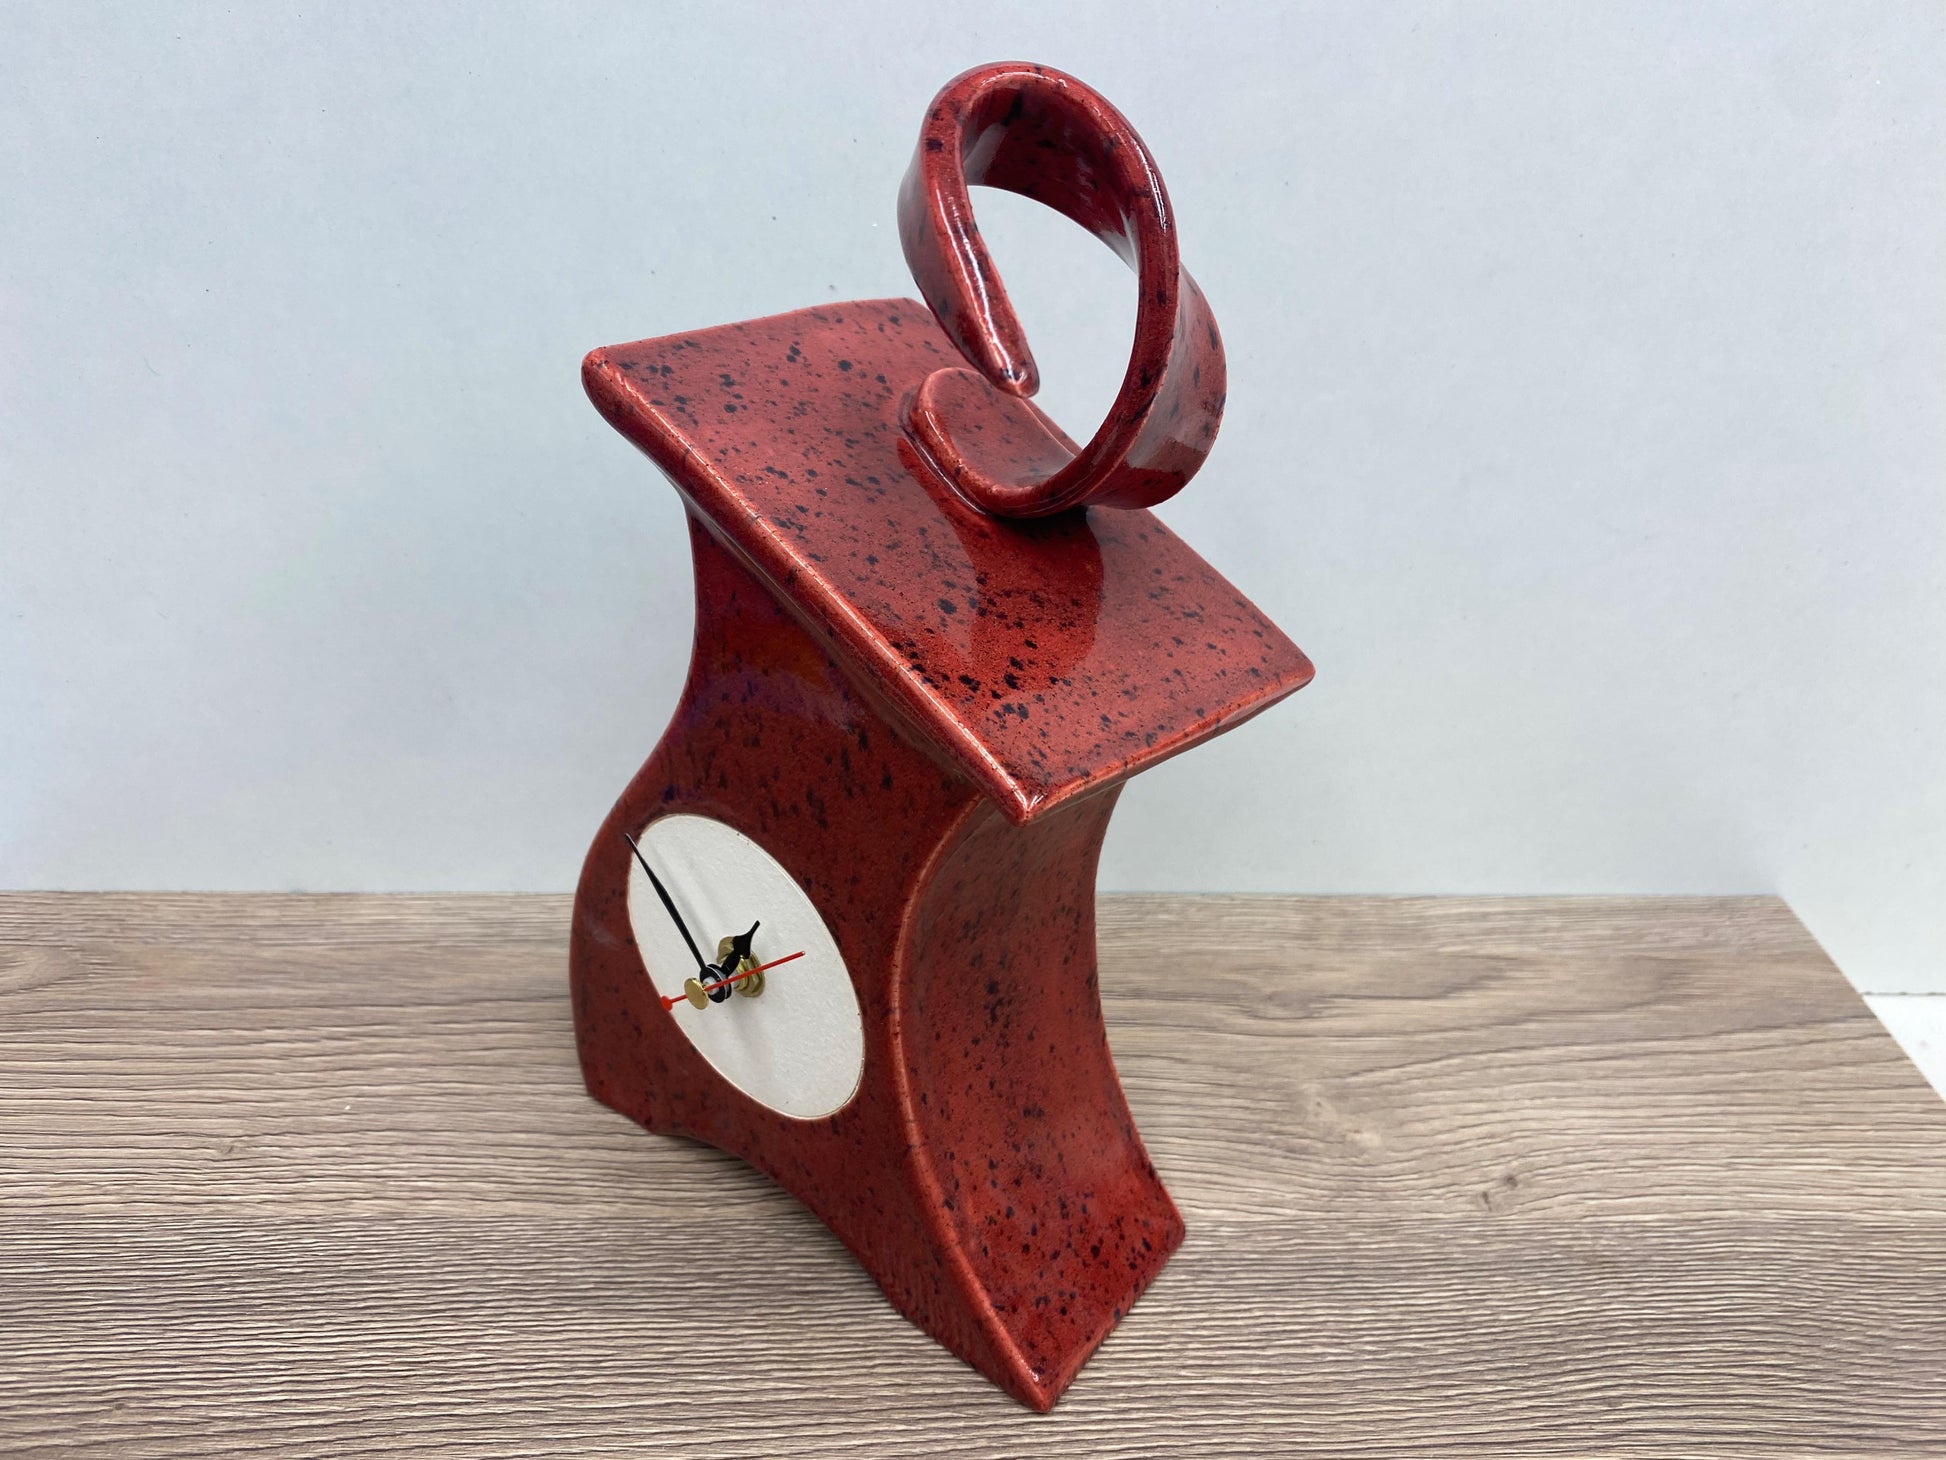 Speckled Red Mantel Clock side view top